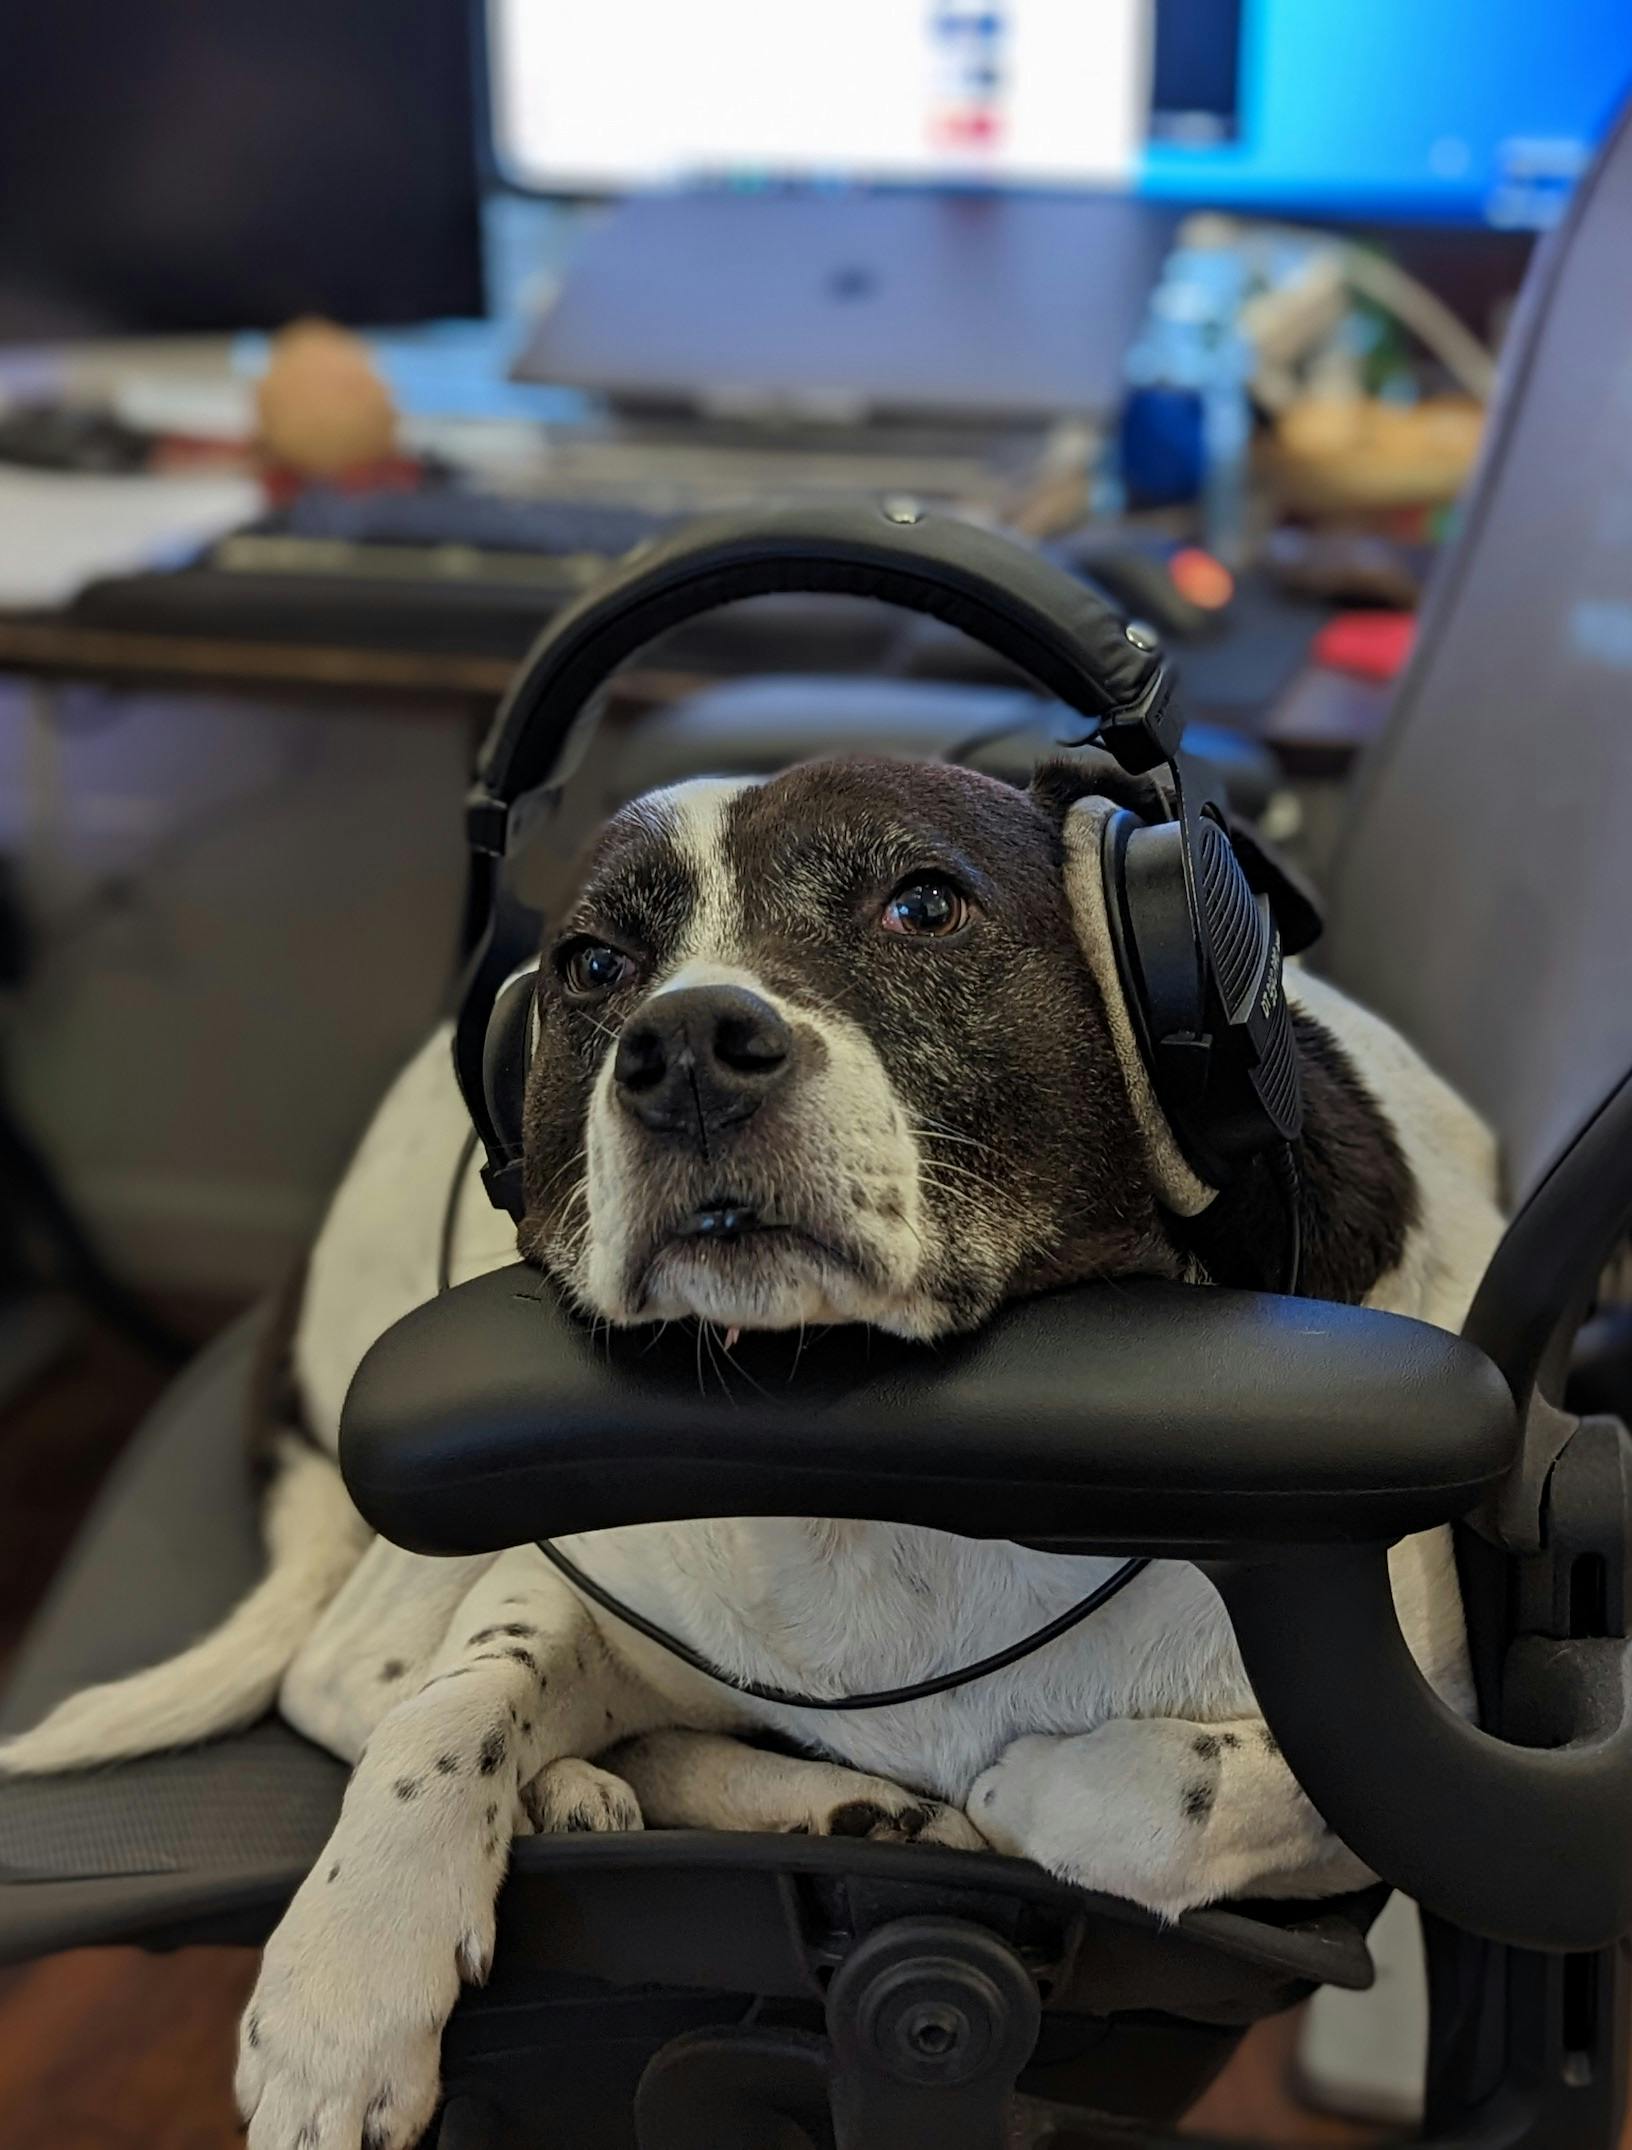 An extremely bored looking dog sitting on an office chair with headphones on and her chin resting on the arm rest.